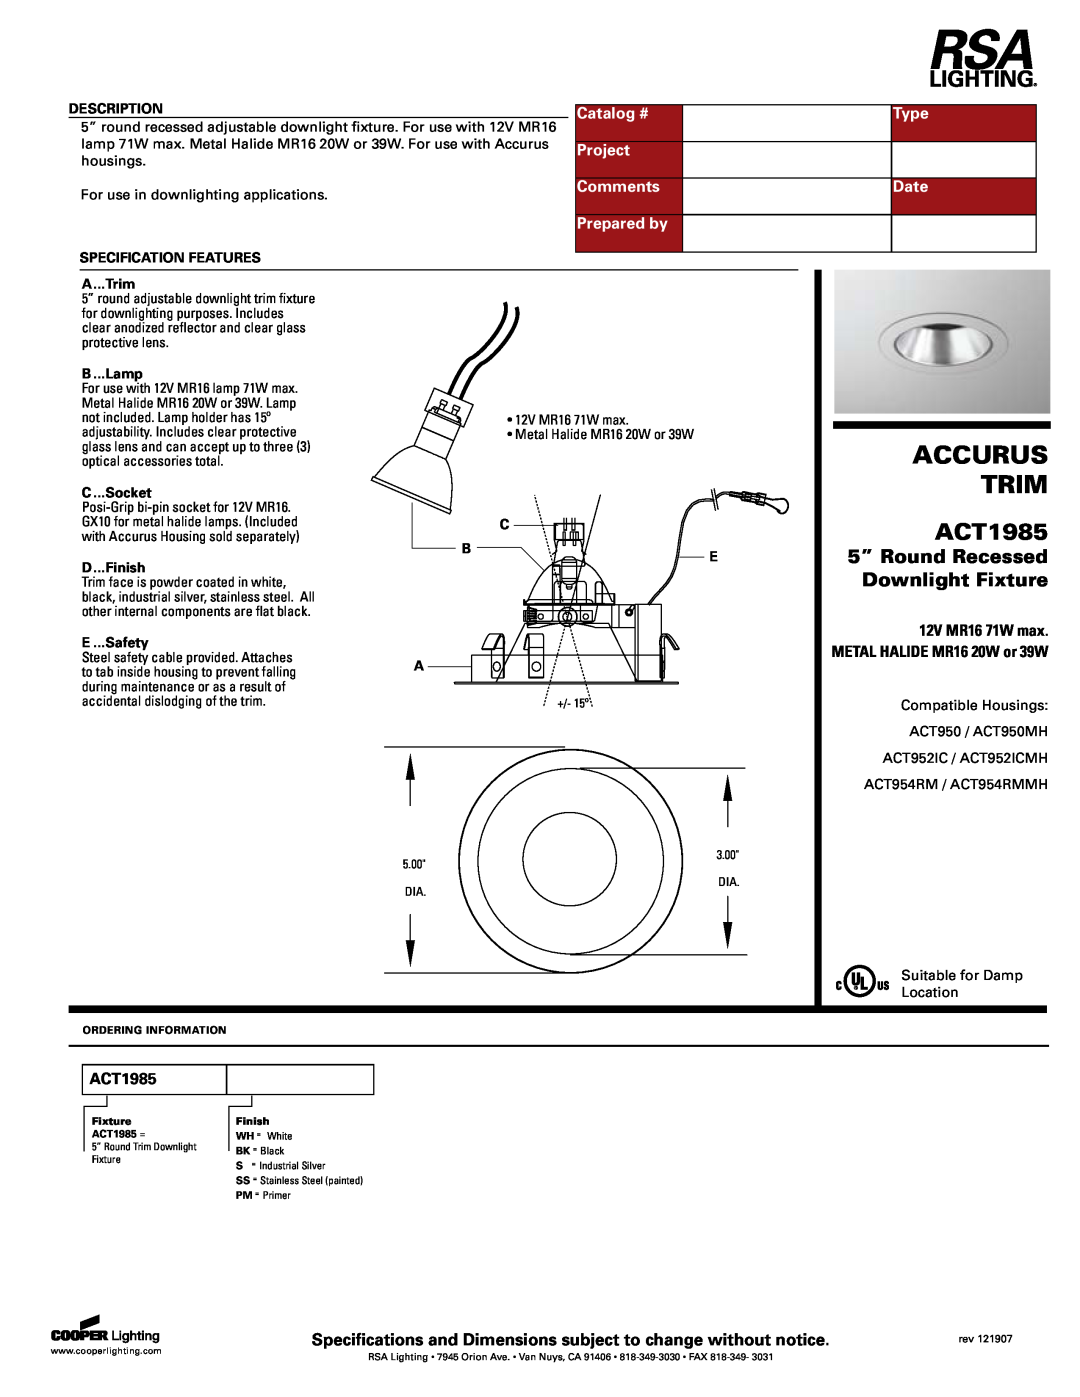 Cooper Lighting ACT1985 specifications Accurus, Trim, 5” Round Recessed, Downlight Fixture, Catalog #, Type, Project, Date 